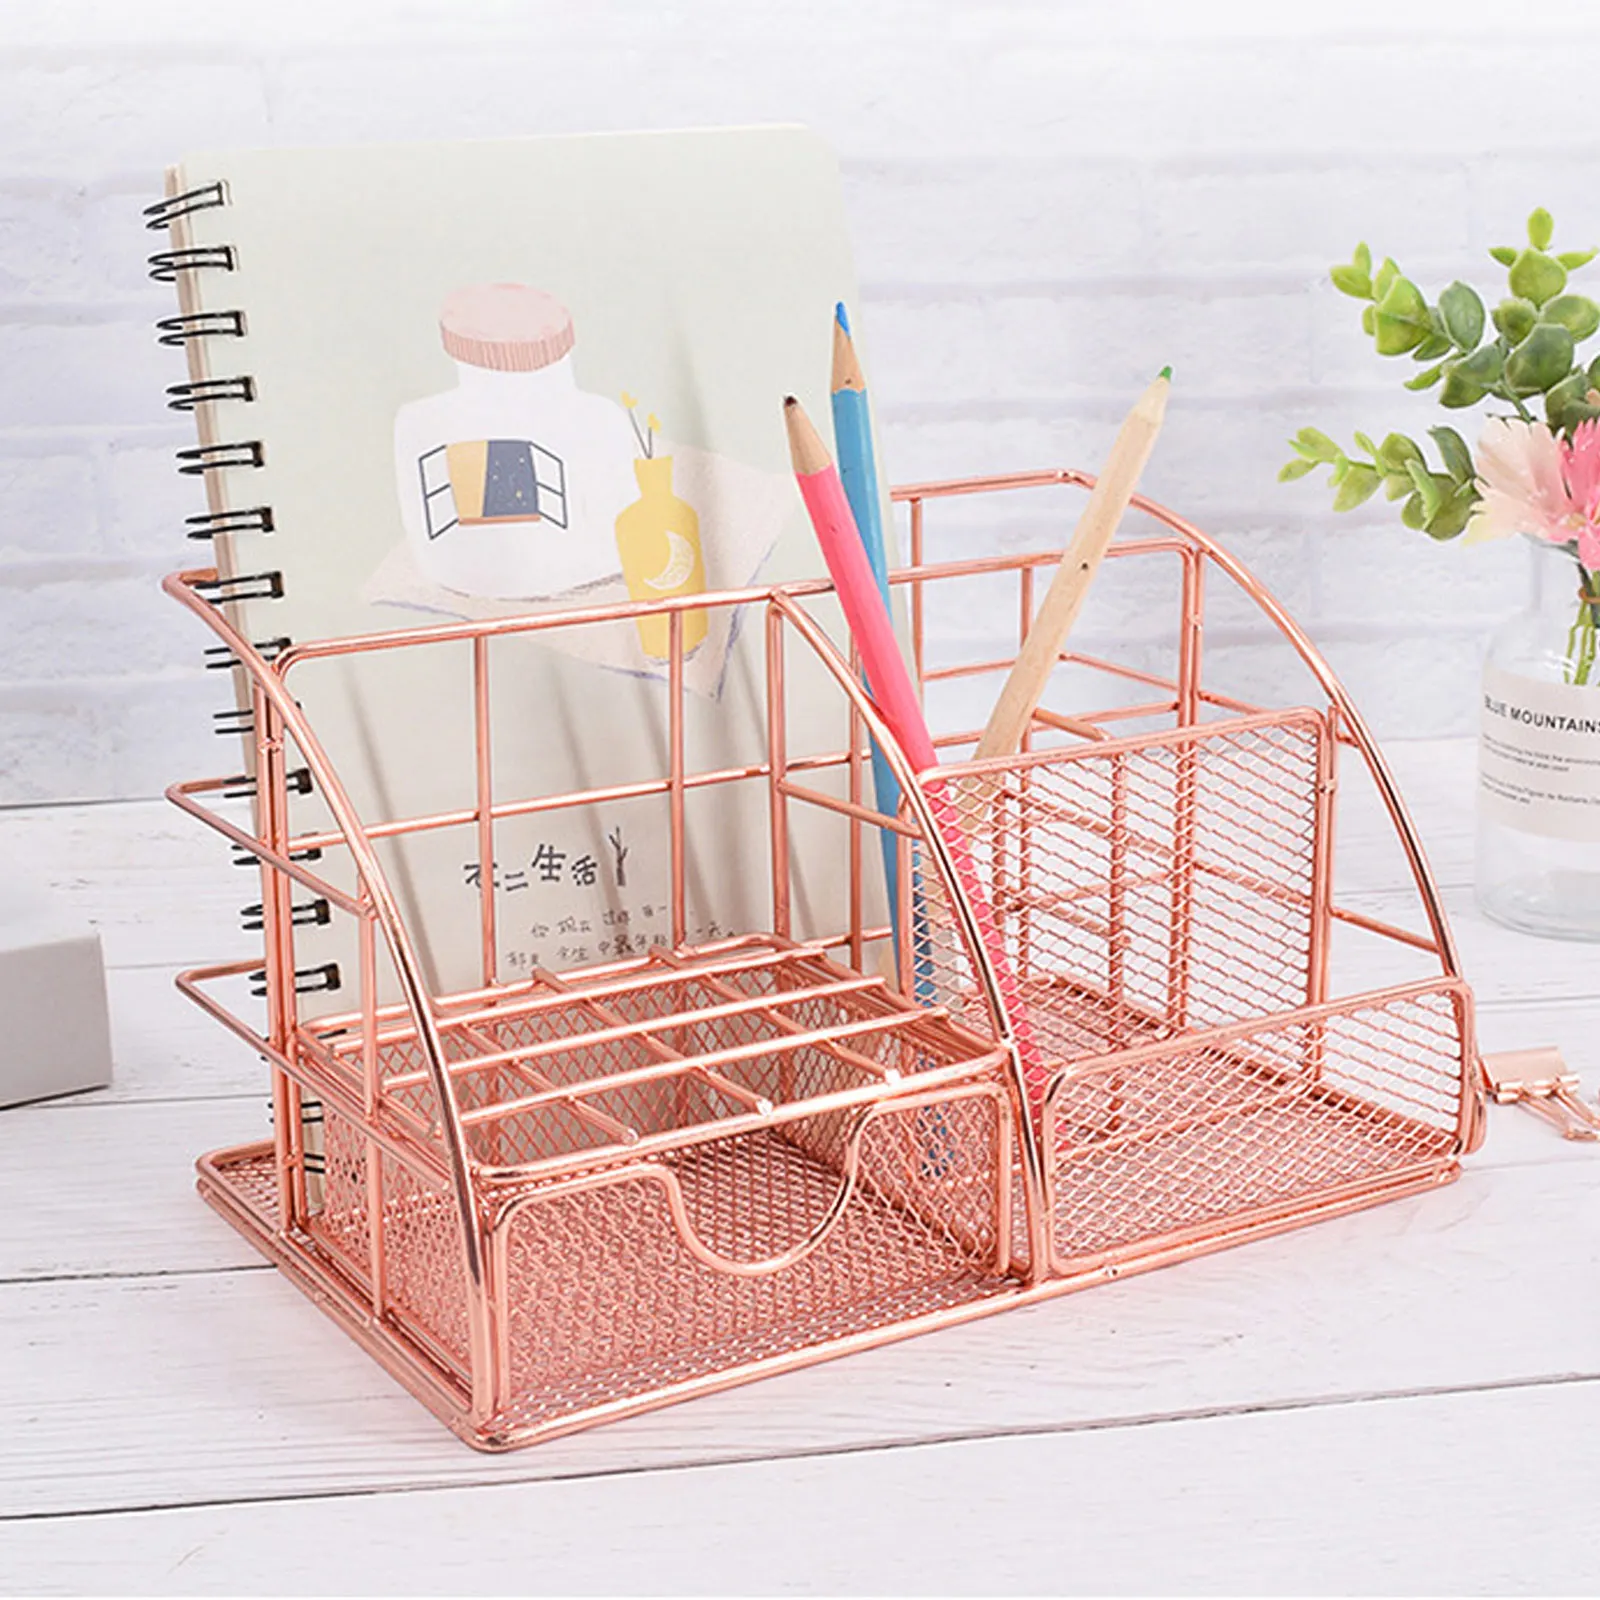 Rose Gold Metal Mesh Office Desk Organizer Pen Magazine Holder Tray File with Drawer for Desktop Accessories Supplies Storage 3 colors summer girls outdoor mesh sun hat children beach uv protection bucket hats with floral headwear cap accessories 6 12m